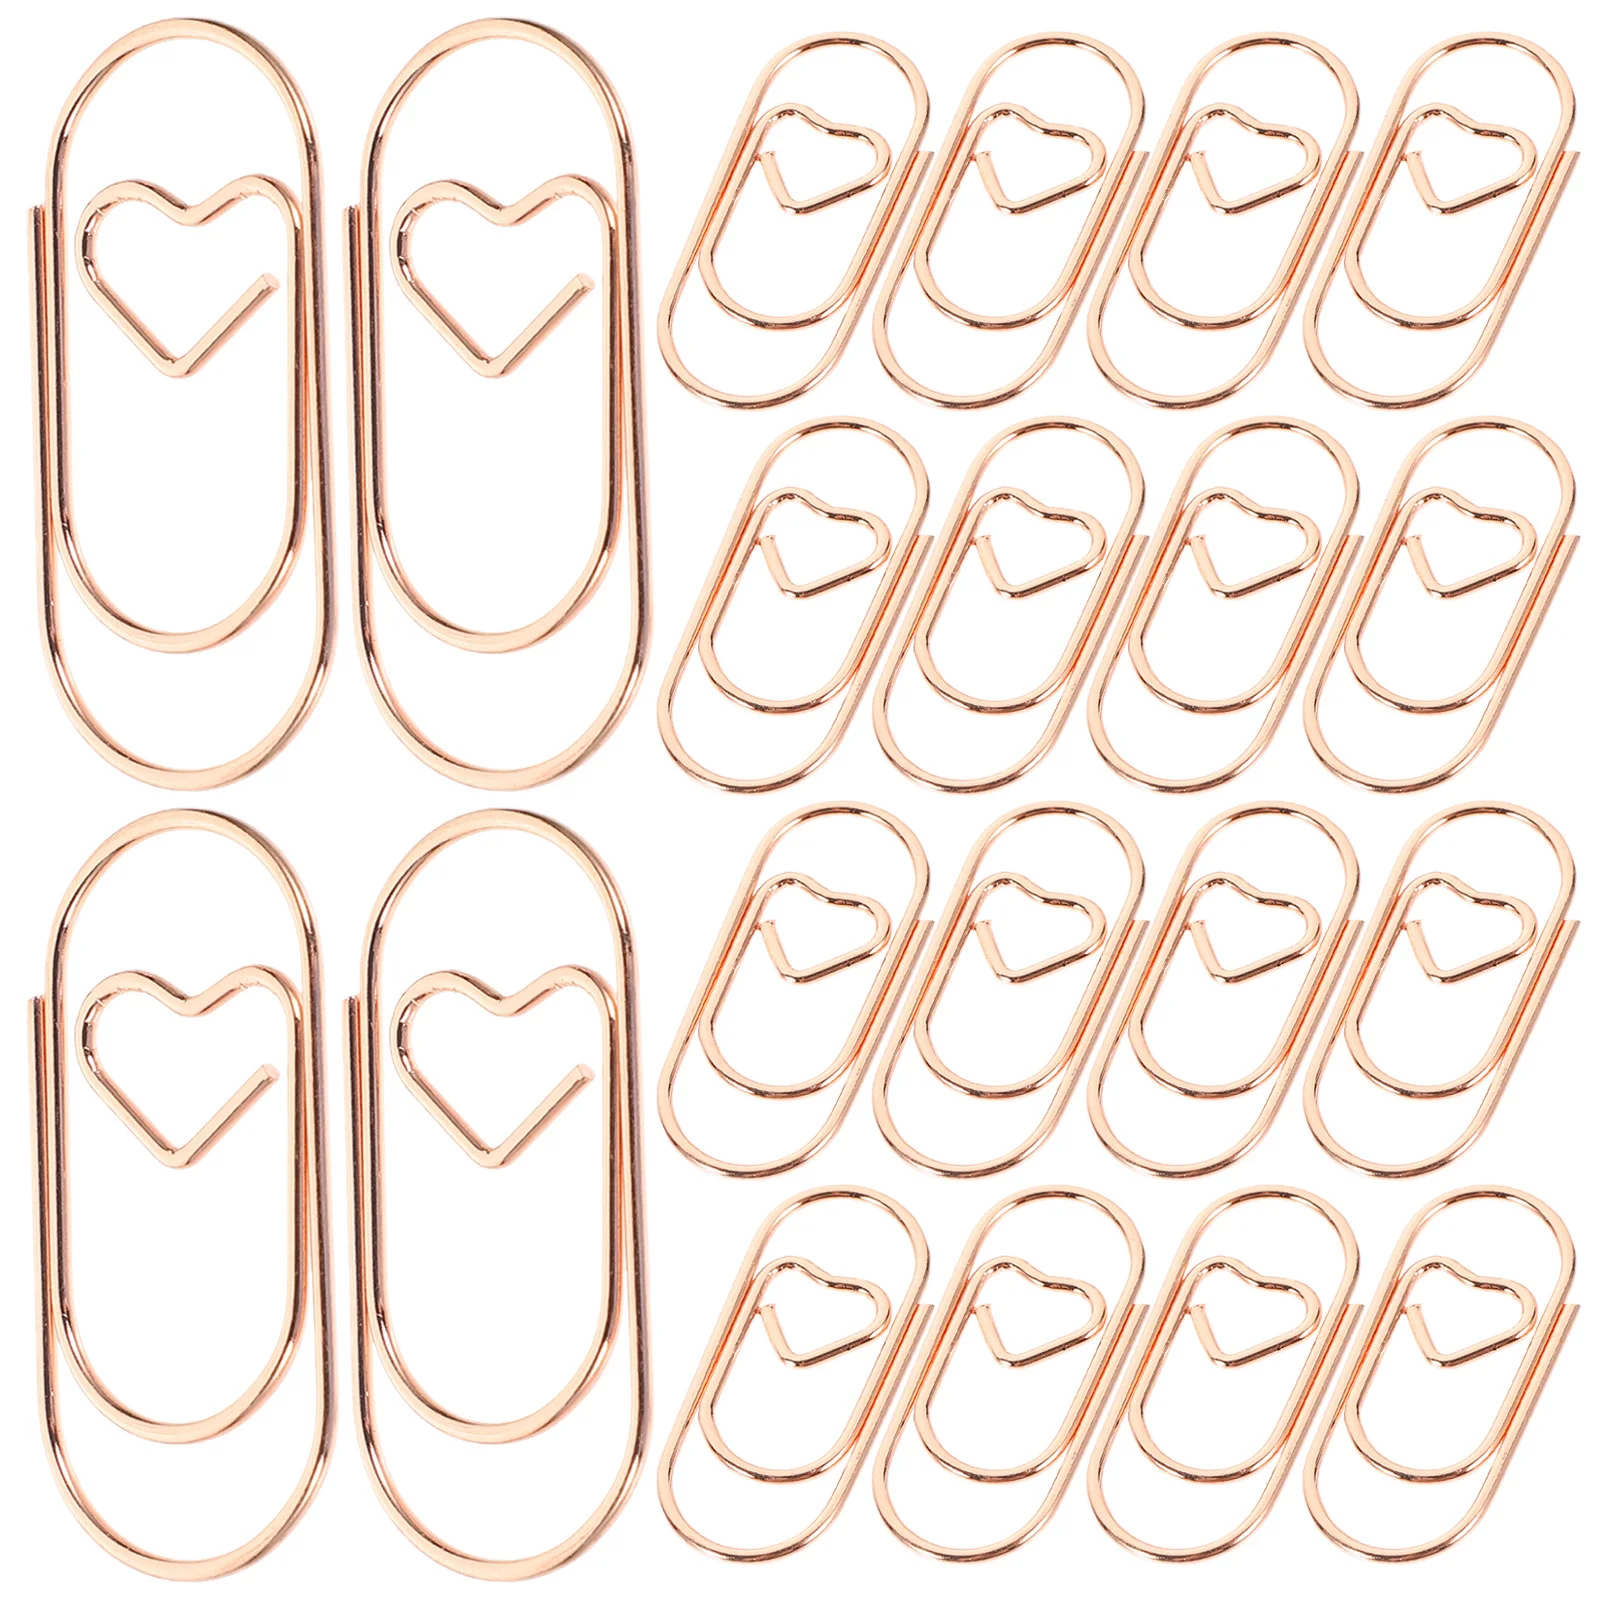 

The Paper Mini heart Rose Gold Color Clip Bookmark binder clip Office Accessories paper Clips Patchwork Document Clip